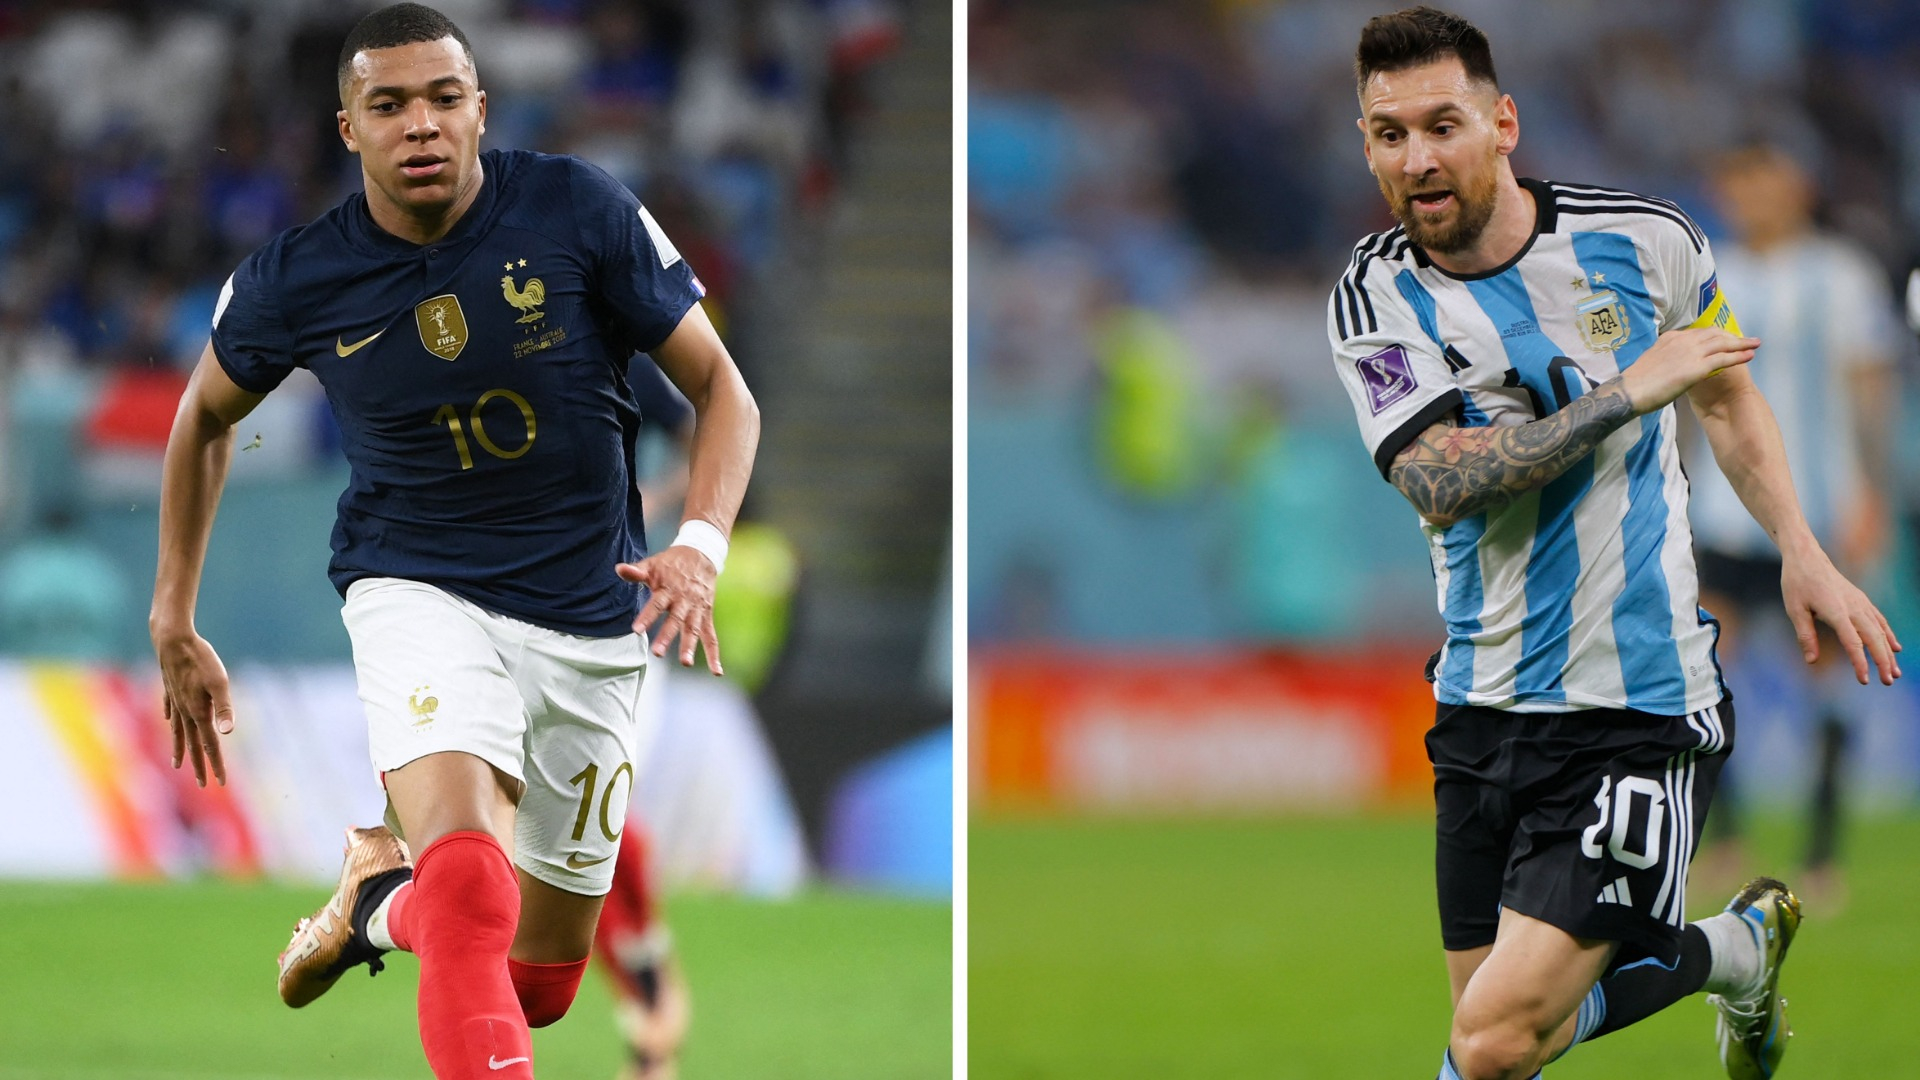 2022 World Cup: Stat Shows Messi, Mbappe Were More Than Goal Scorers